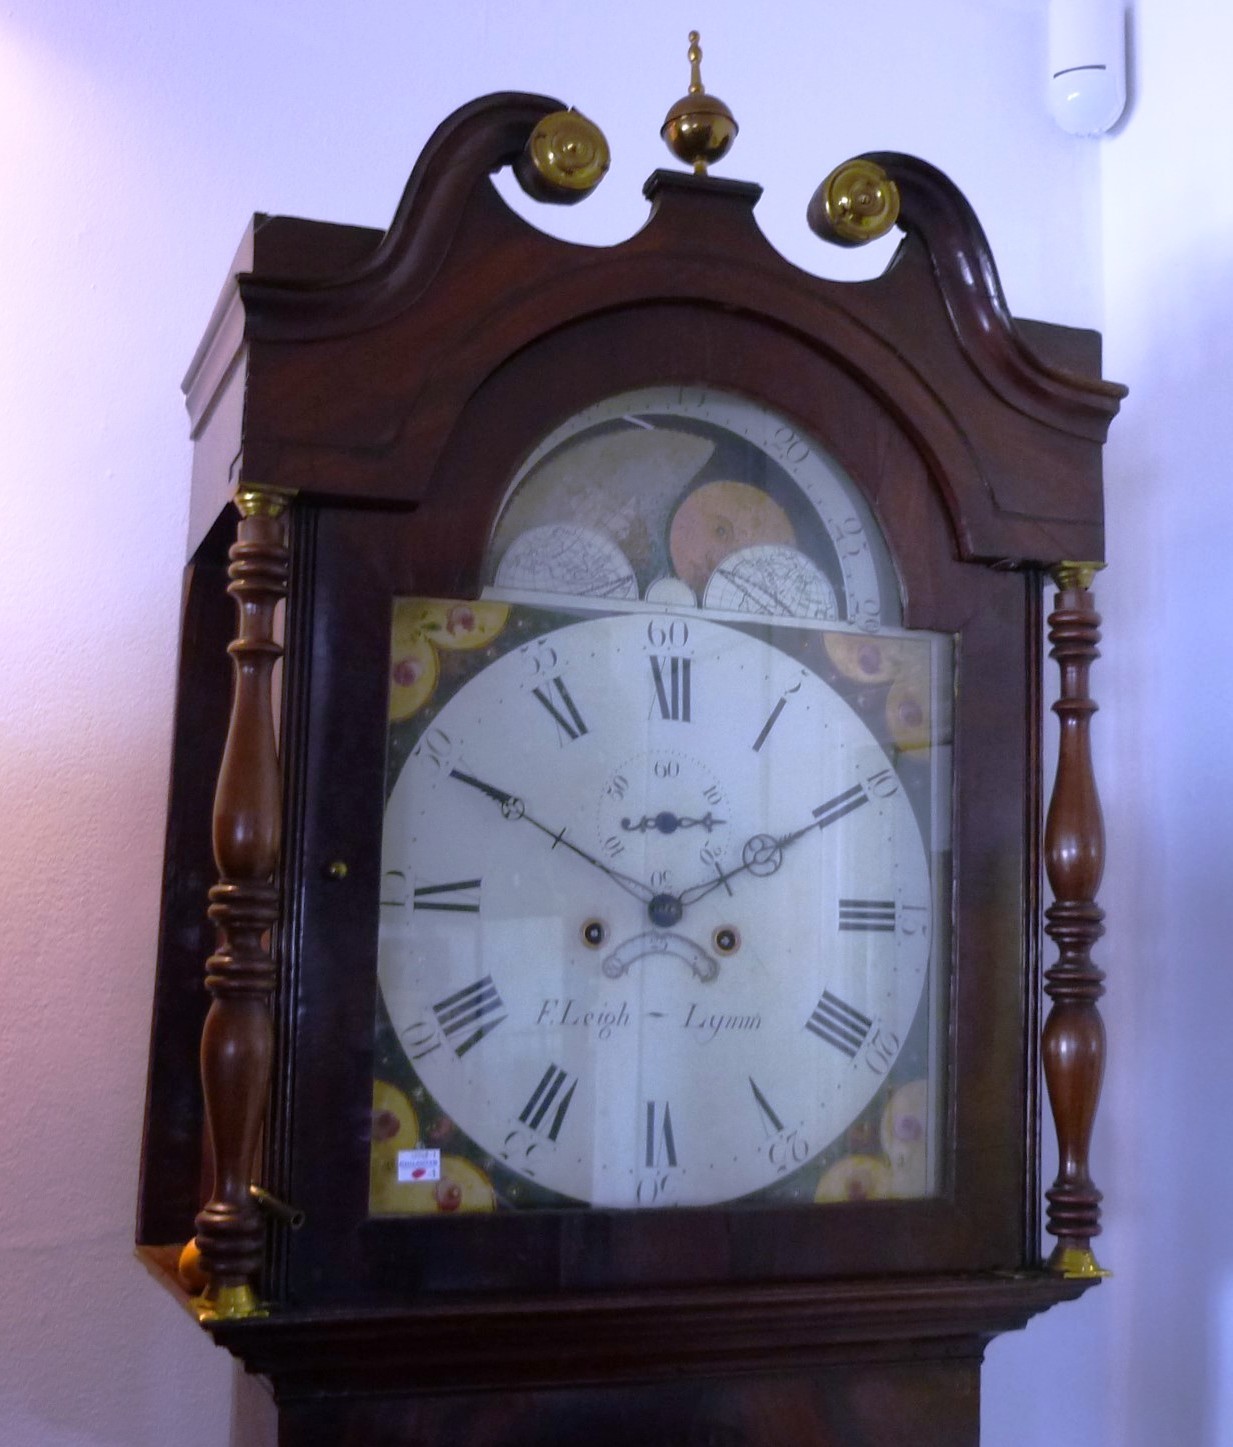 F. Leigh - Lymm, a mahogany 8-day longcase clock with two-weight movement striking on a bell, the - Image 2 of 5